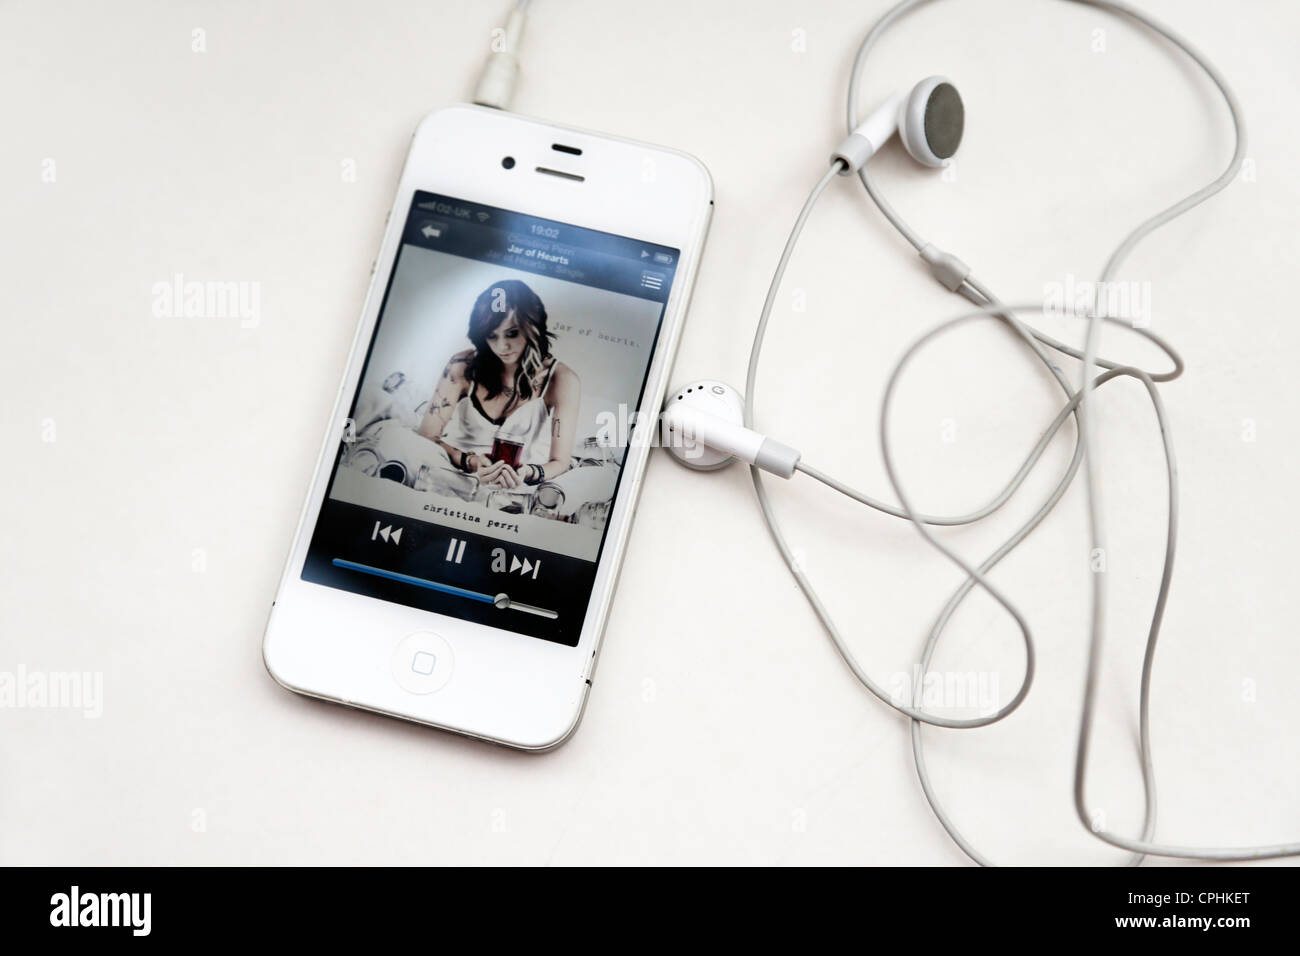 iPhone 4S With Headphones Plugged In Playing Music Stock Photo - Alamy